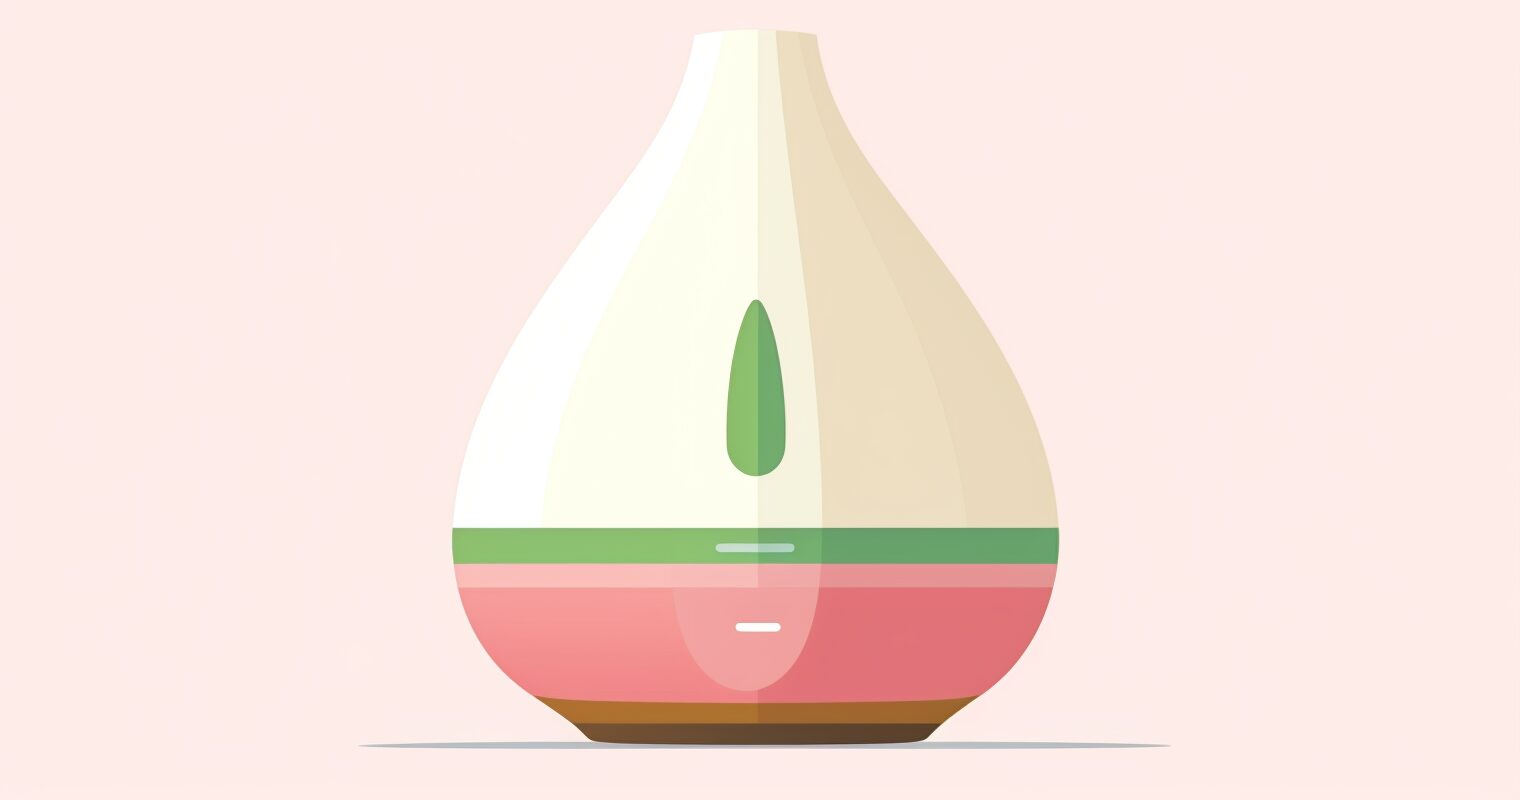 A cream, green and pink colored essential oil diffuser.